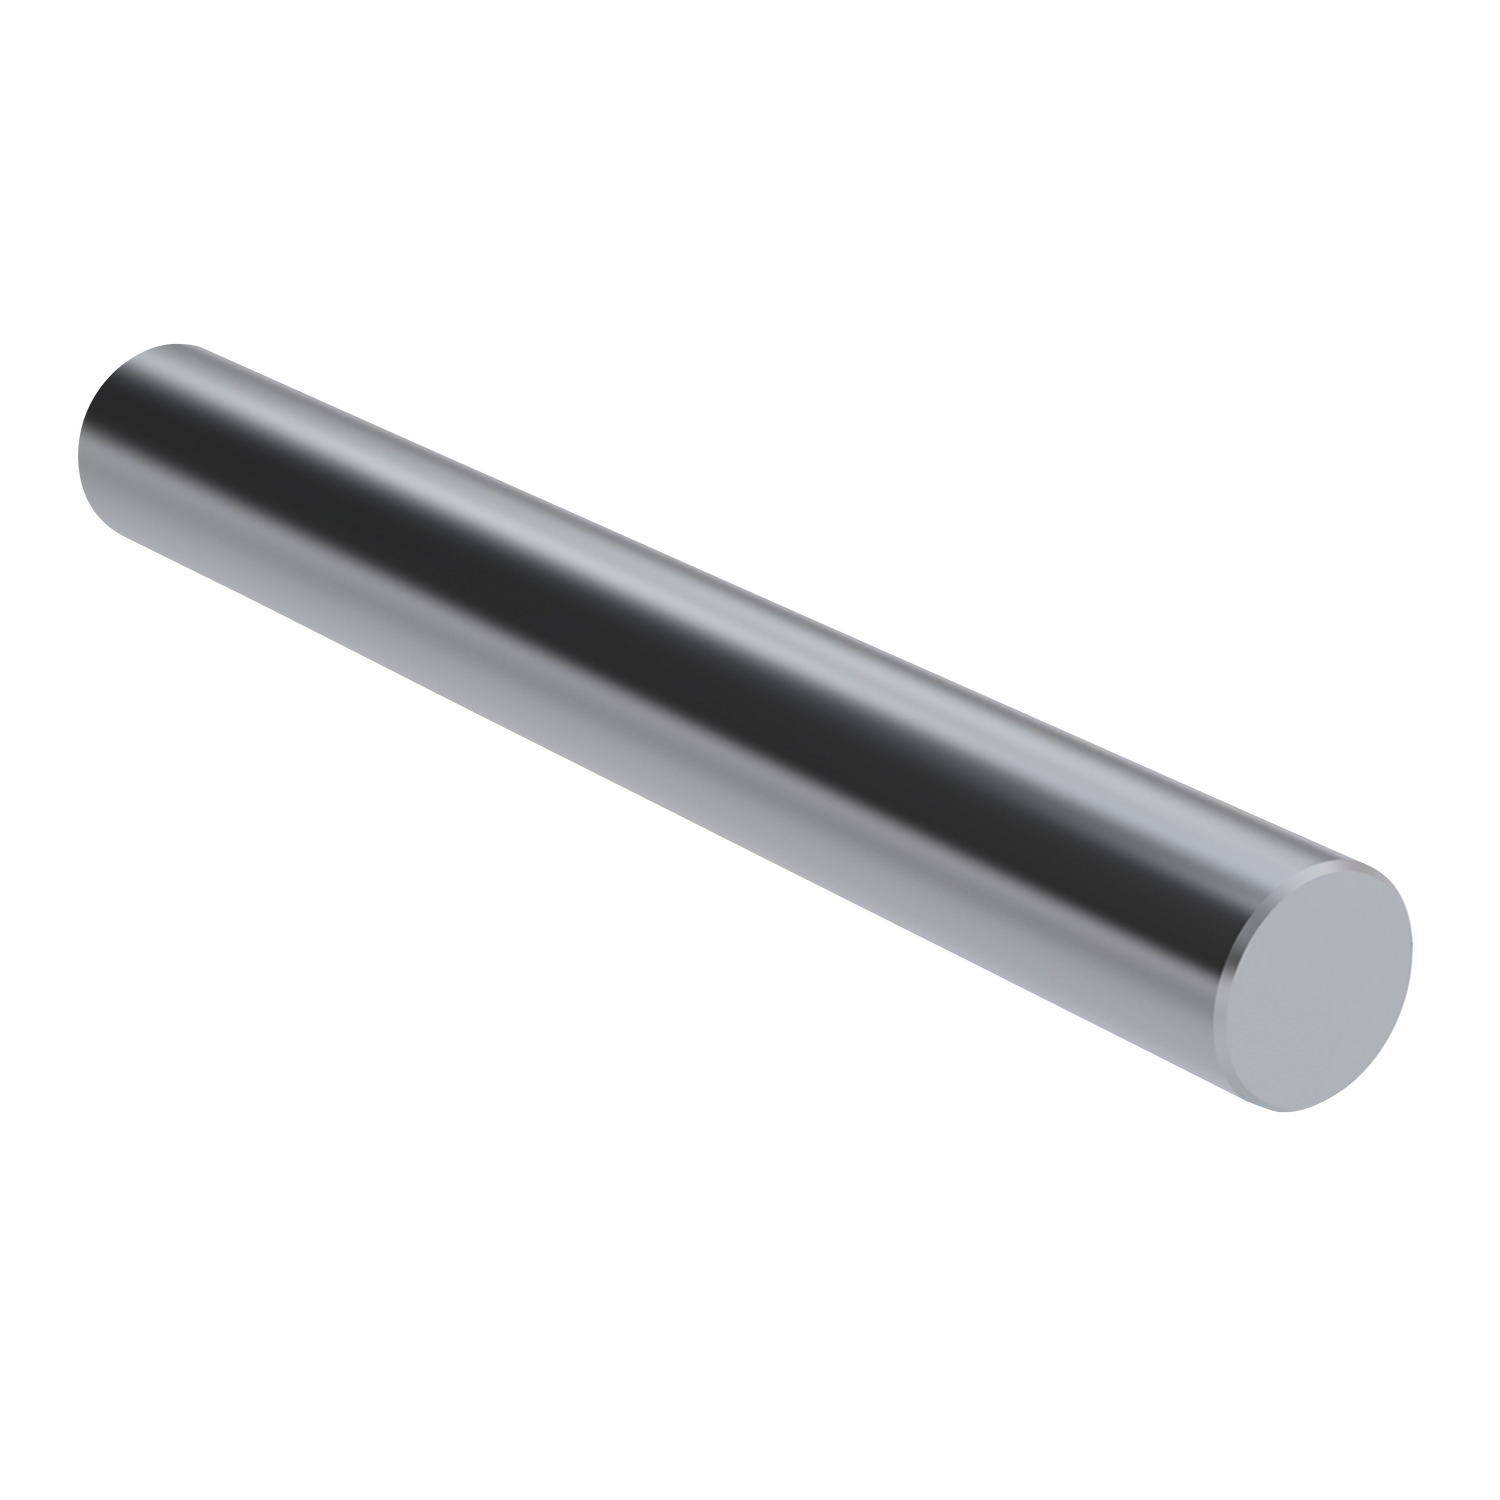 Steel Linear Shafts Hardened steel and corrosion resistant steel linear shafting stocked in lengths of 3m.